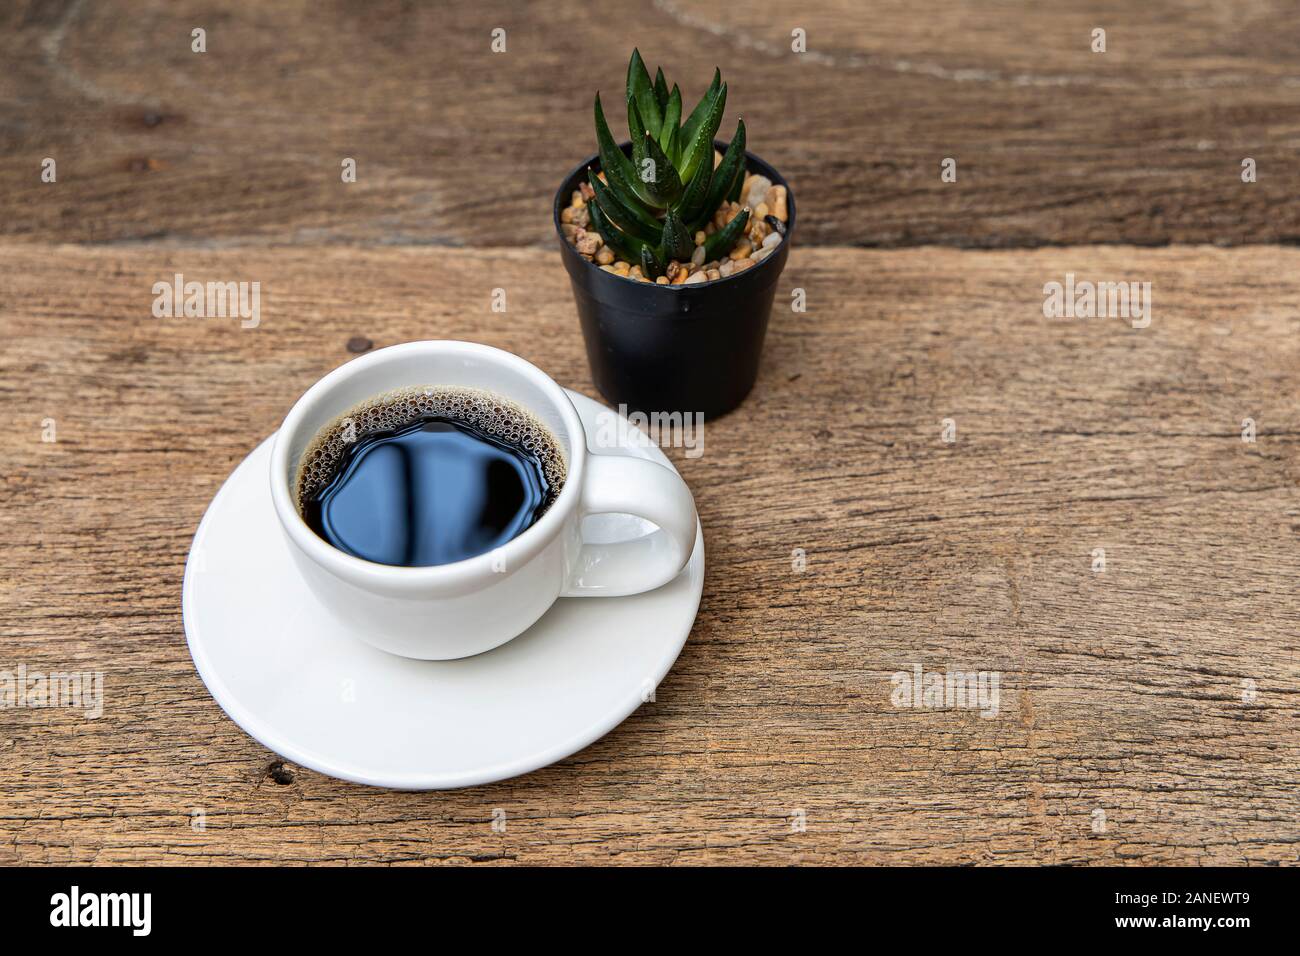 A white cup of coffee on the wooden table background. Stock Photo